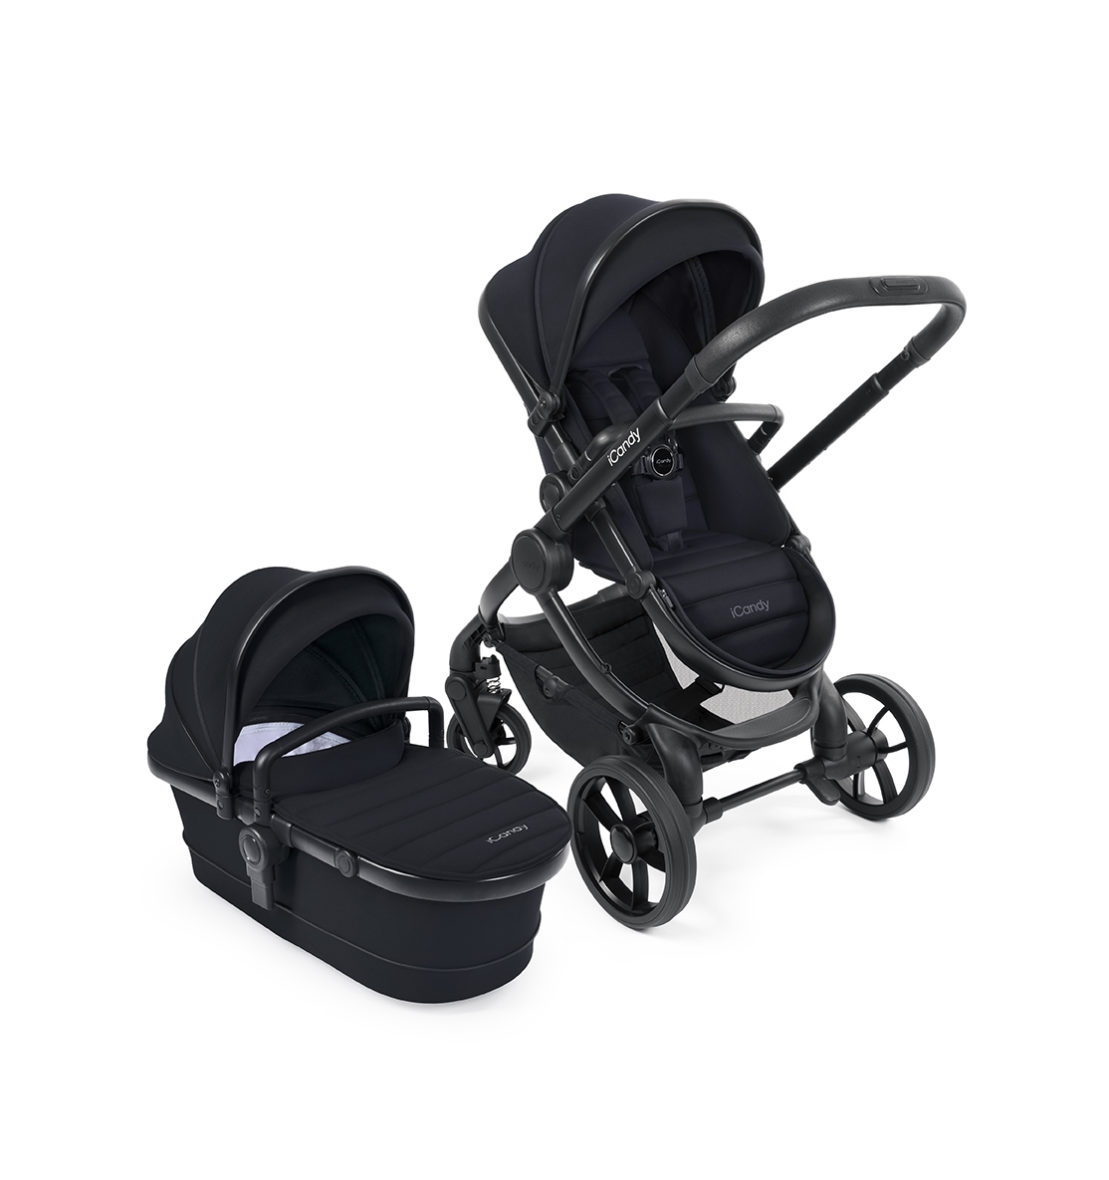 iCandy Peach 7 Pushchair & Carrycot- Black Edition